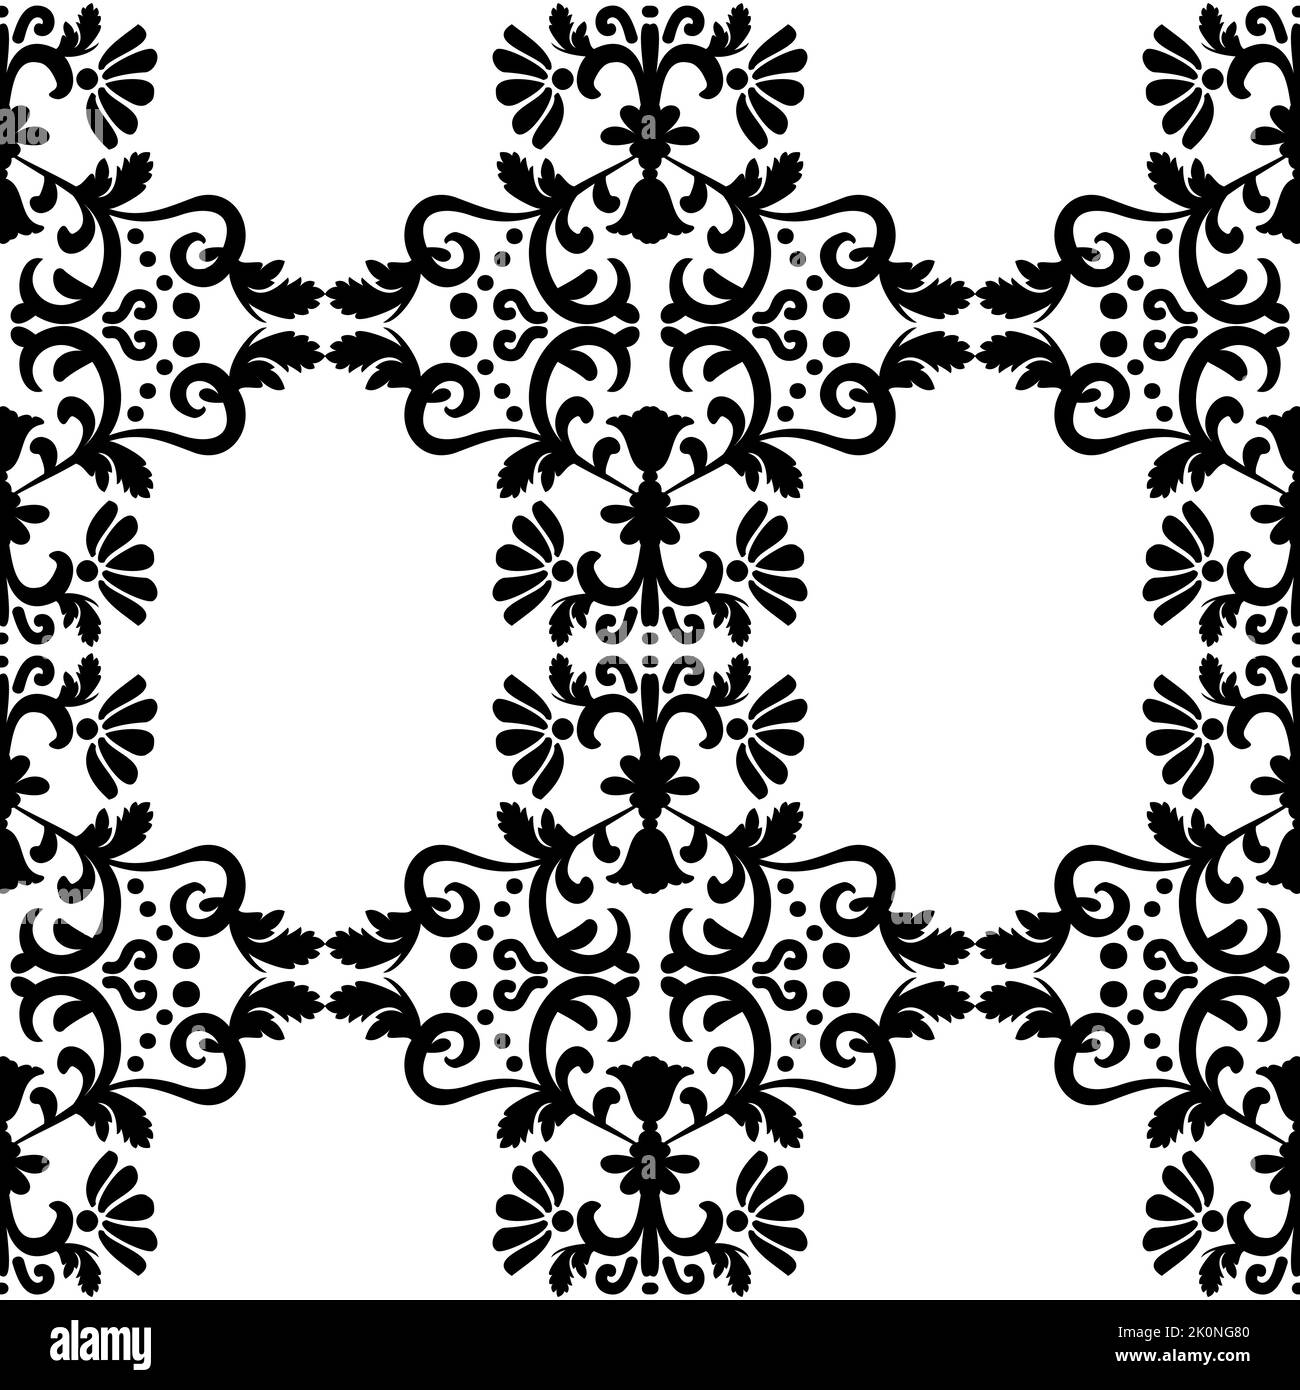 Seamless victorian pattern with floral elements. Black and white. Vector illustration. Stock Vector